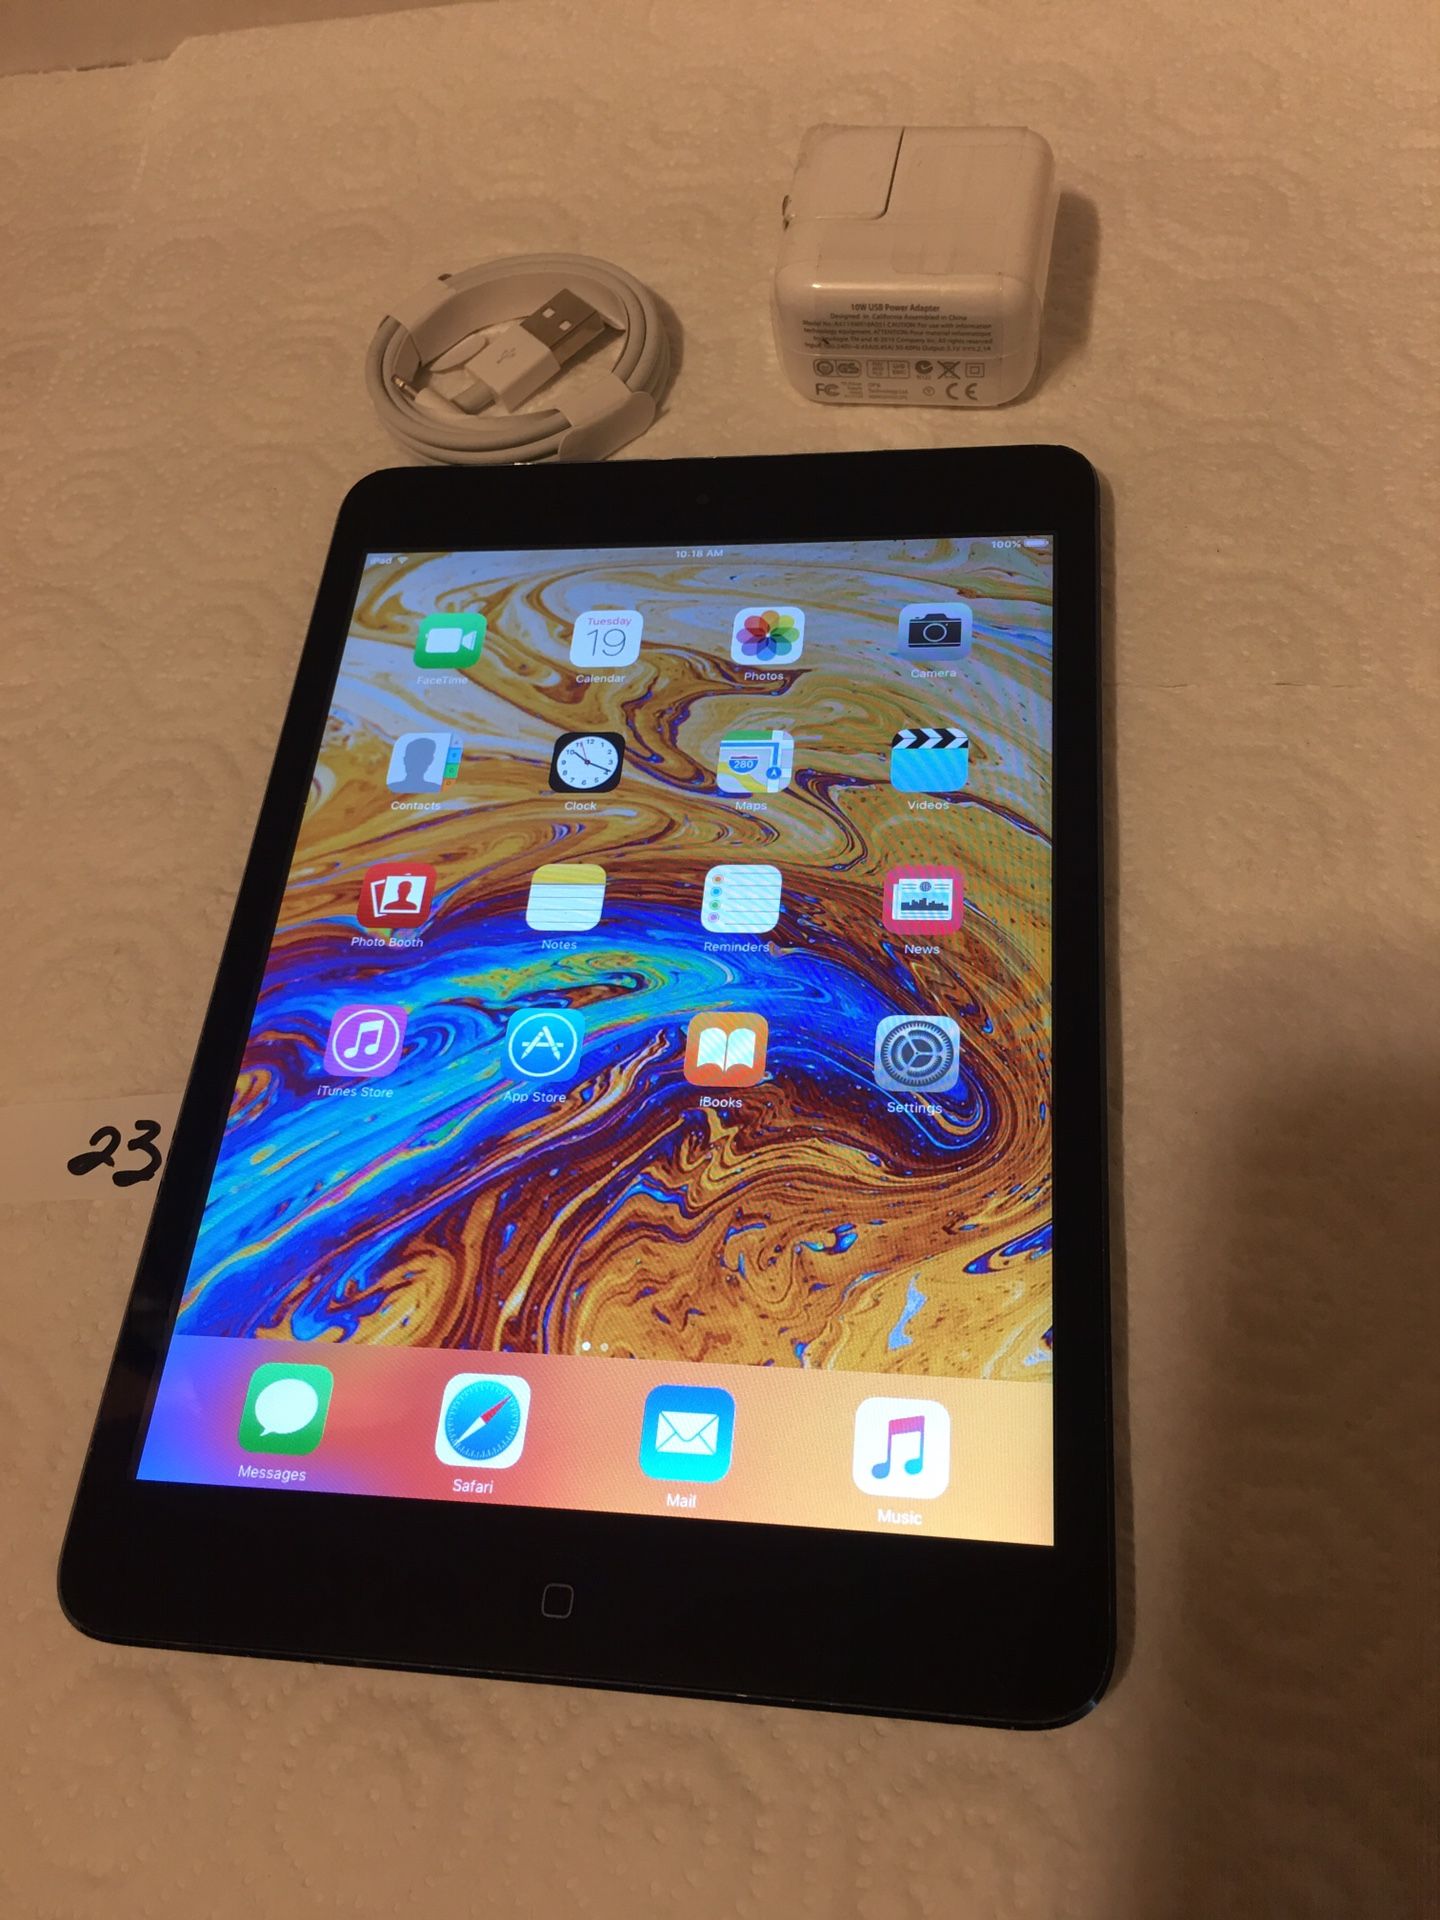 Apple ipad mini 1,16 GB,Black/Black,A1432,Clean iCloud,Fully Functional,Good Conditions.